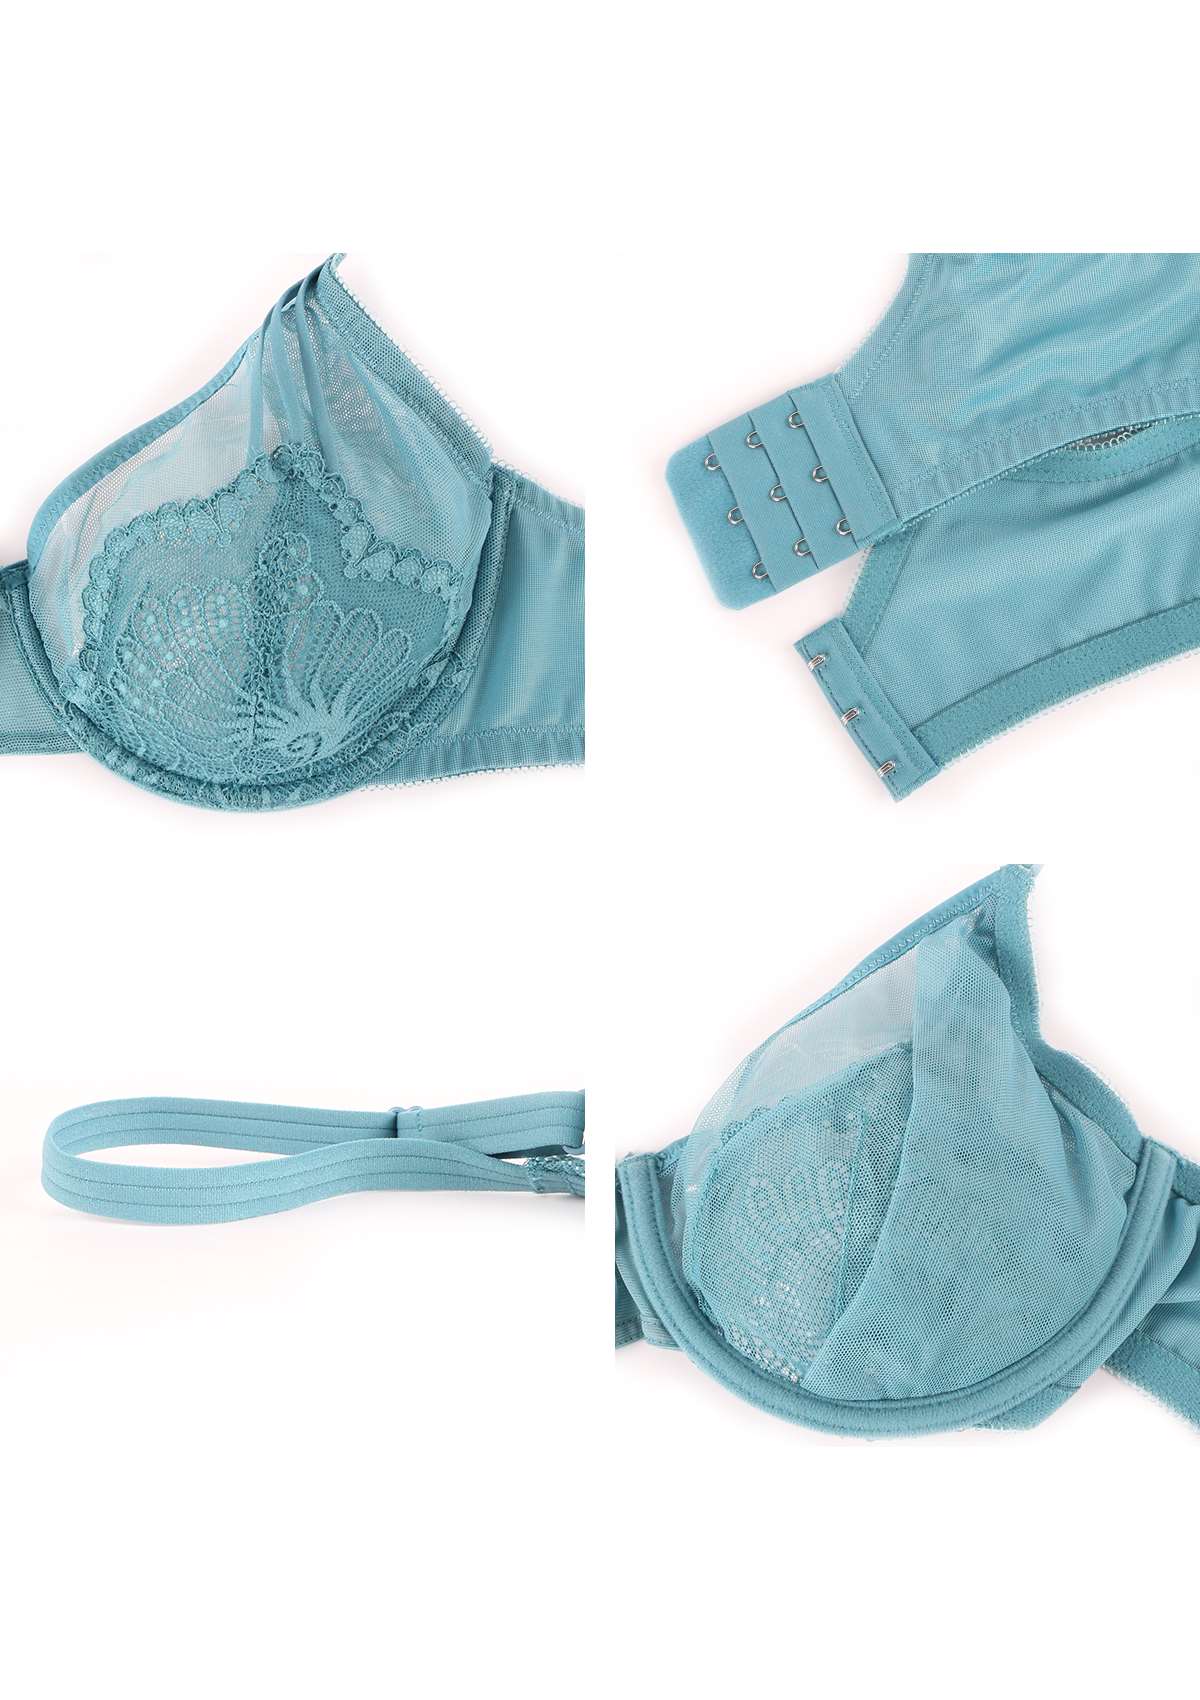 HSIA Sexy Floral Lace Minimizer Bra - Crystal Blue / 36 / C